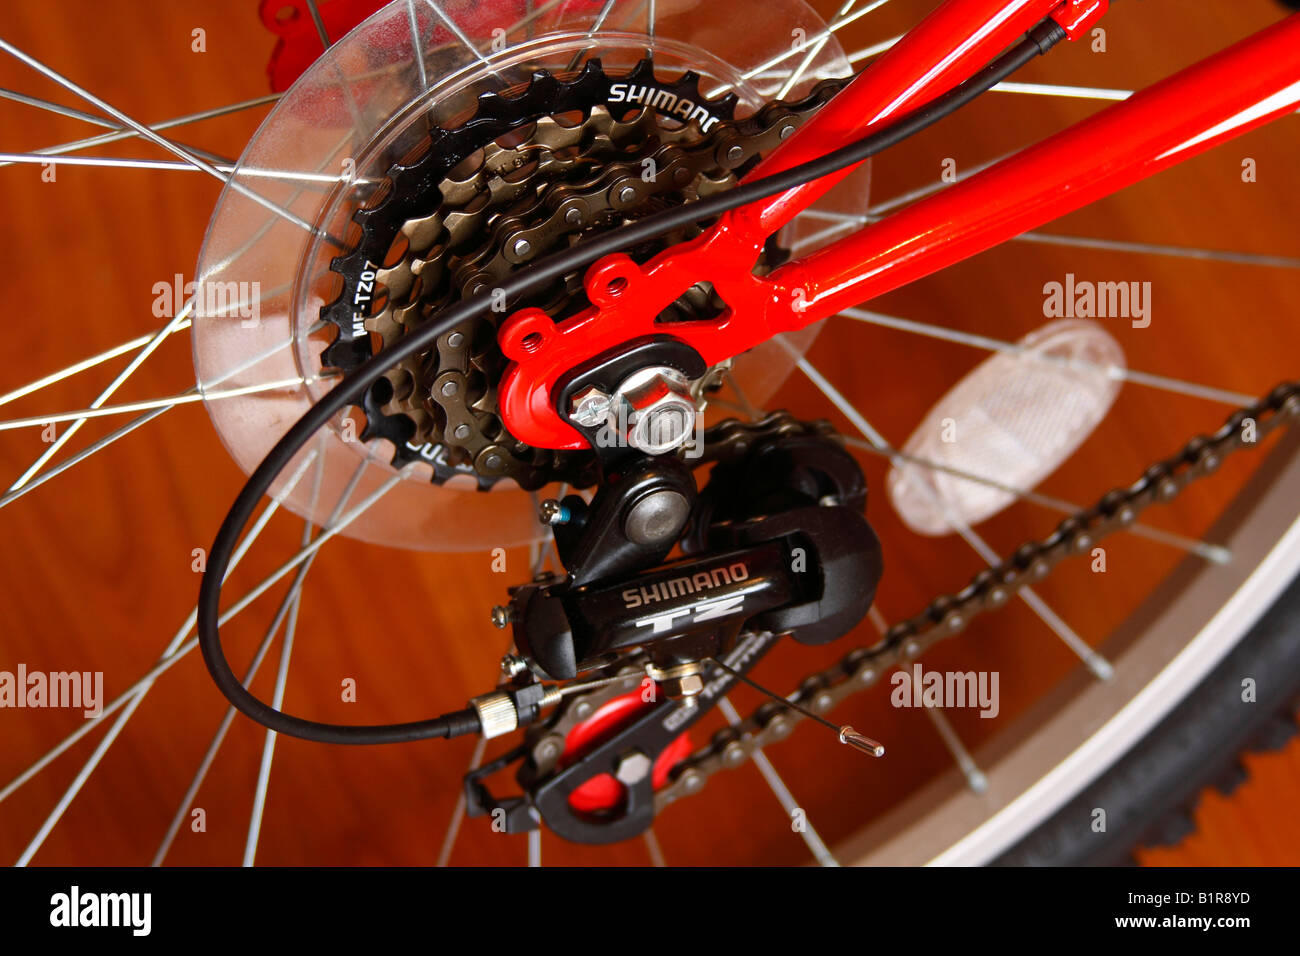 Shimano Geared Bicycle, close up Stock Photo